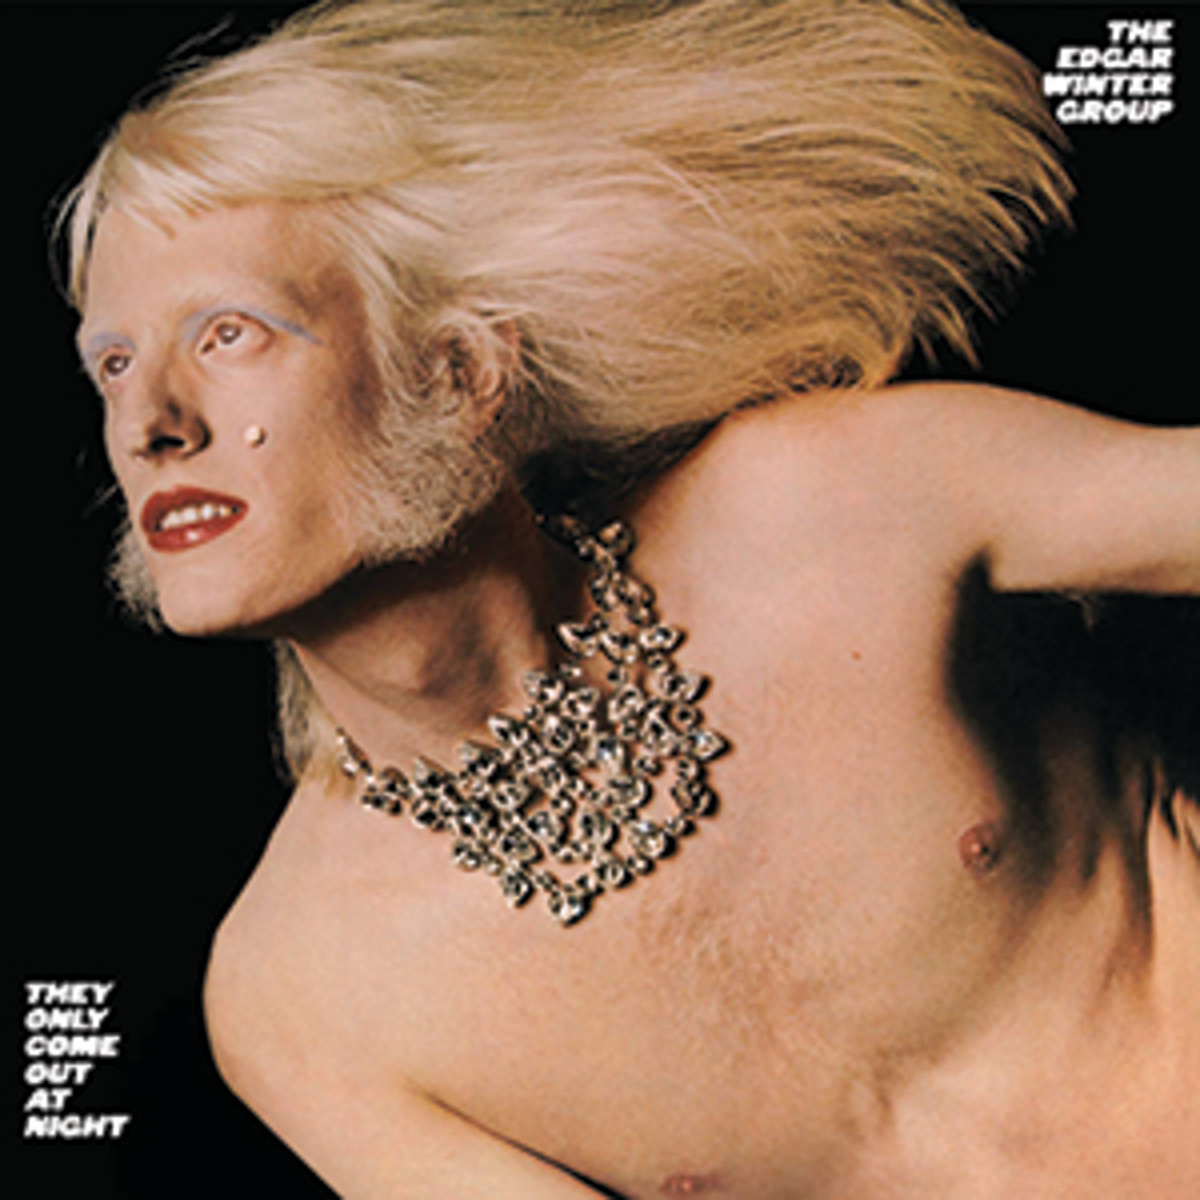 Edgar Winter, They Only Come Out at Night